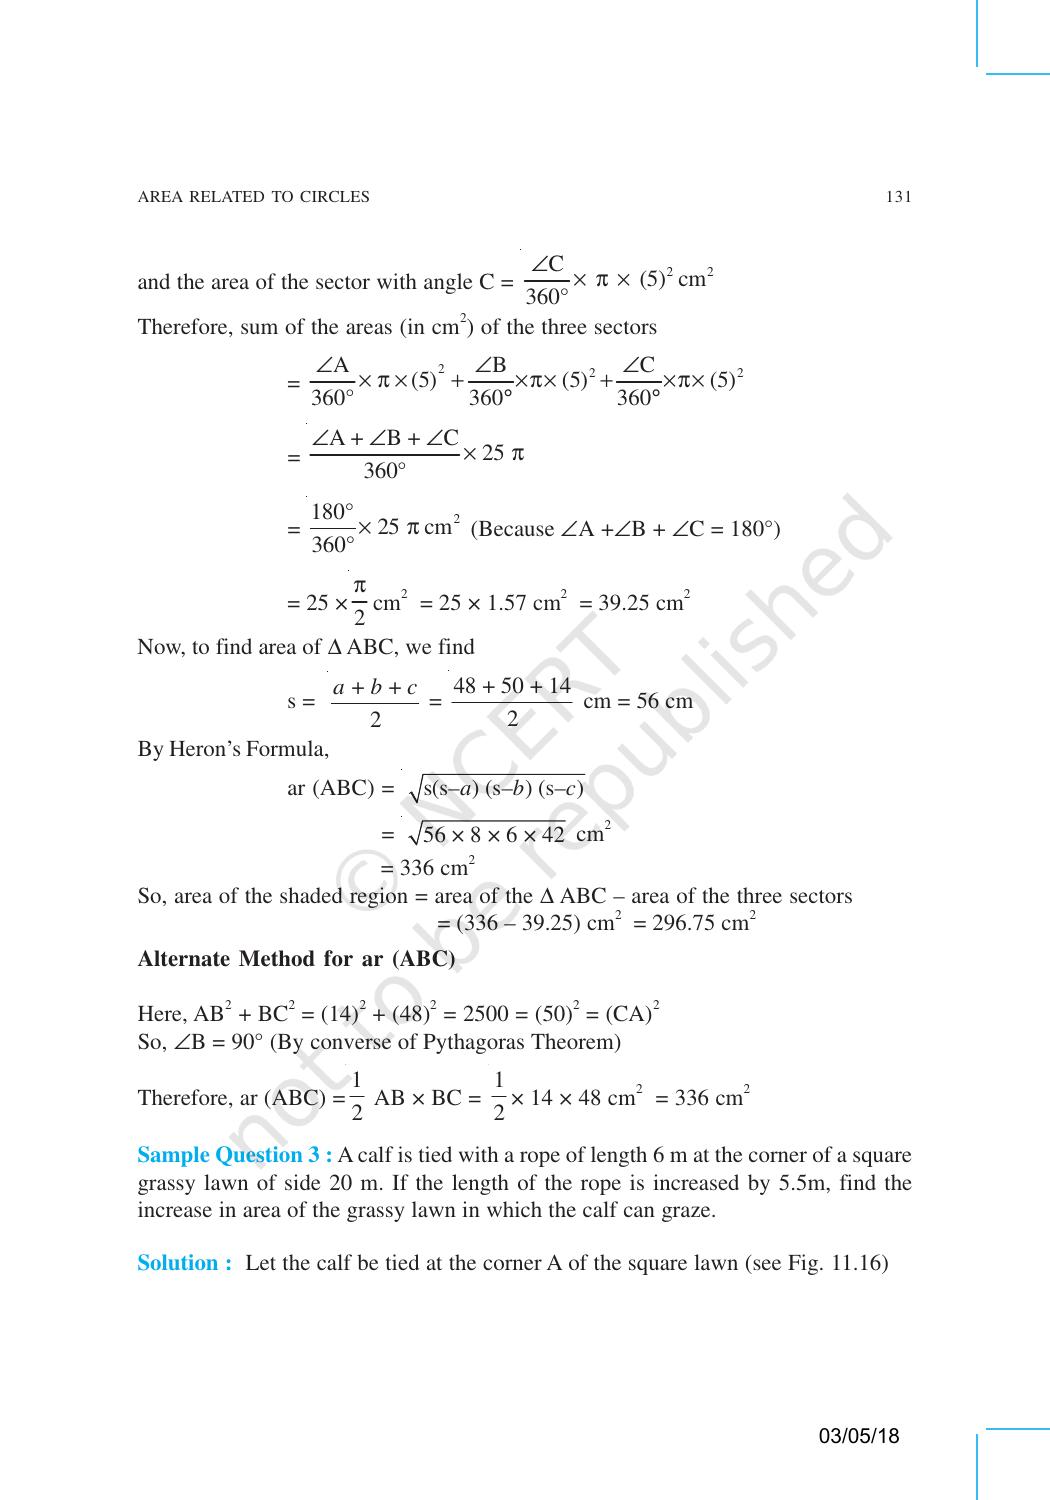 NCERT Exemplar Book for Class 10 Maths: Chapter 11 Areas related to Circles - Page 13